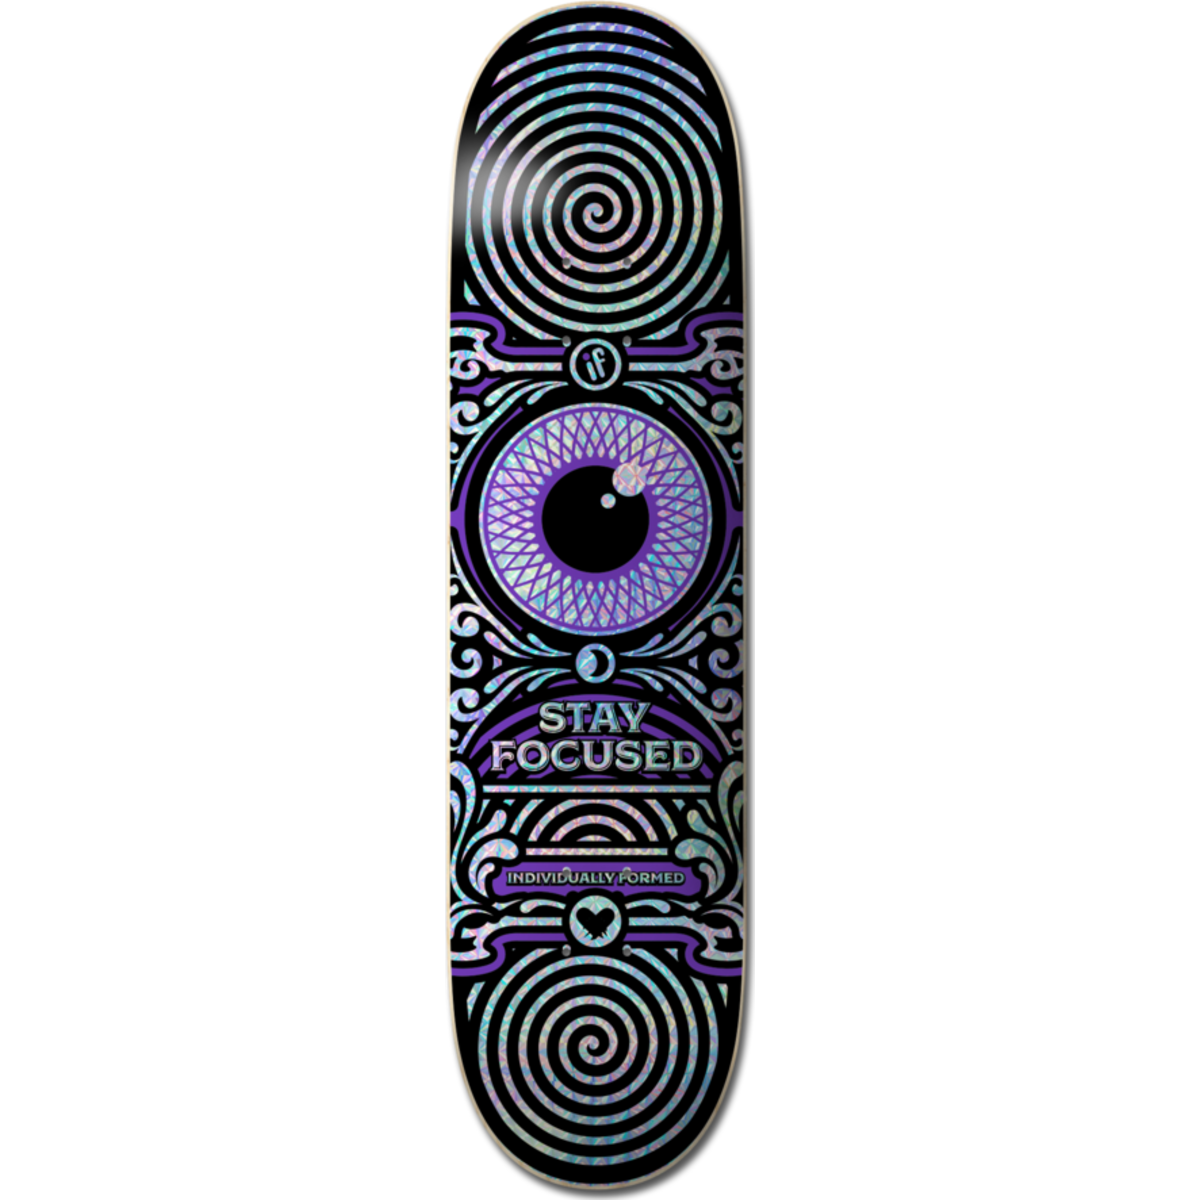 IF SKATE CO -STAY FOCUSED - PURPLE - HOLOGRAPHIC